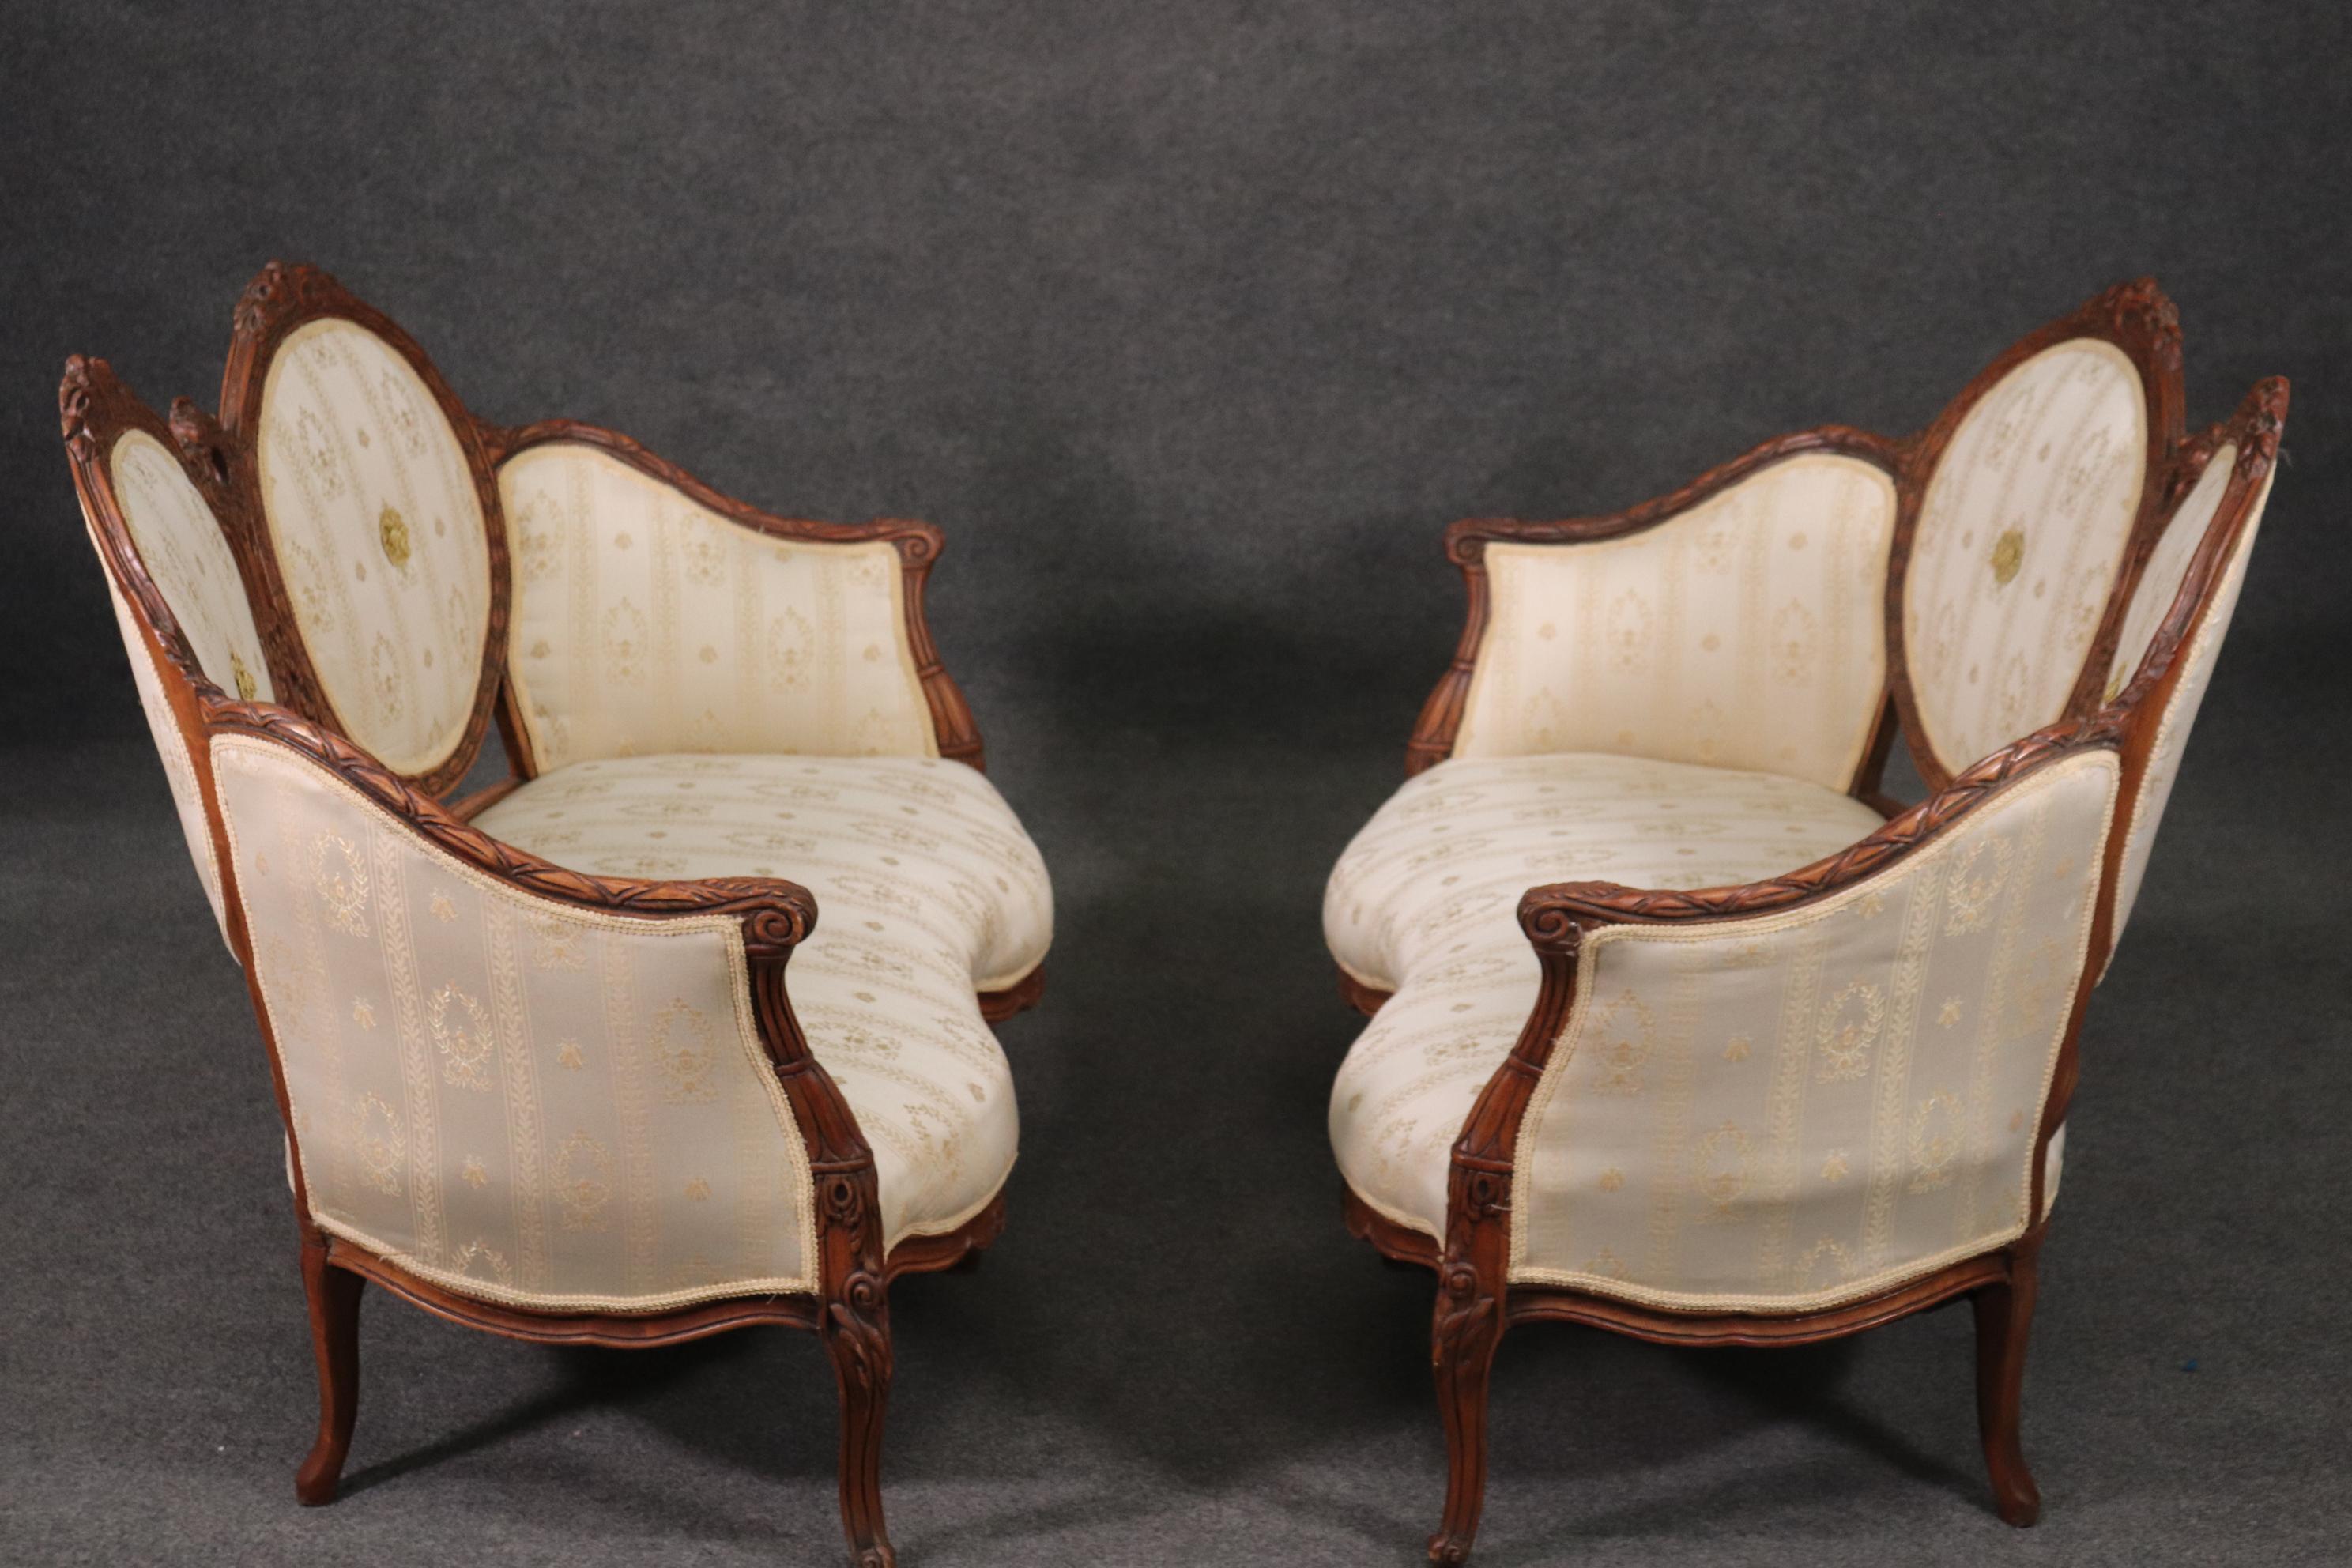 This is a superb pair of French style walnut settees. They are in beautiful upholstery and have great lines. They each measure 49 wide x 31 deep x 37.5 tall x 14.5 inch seat height. They date to the 1920s.